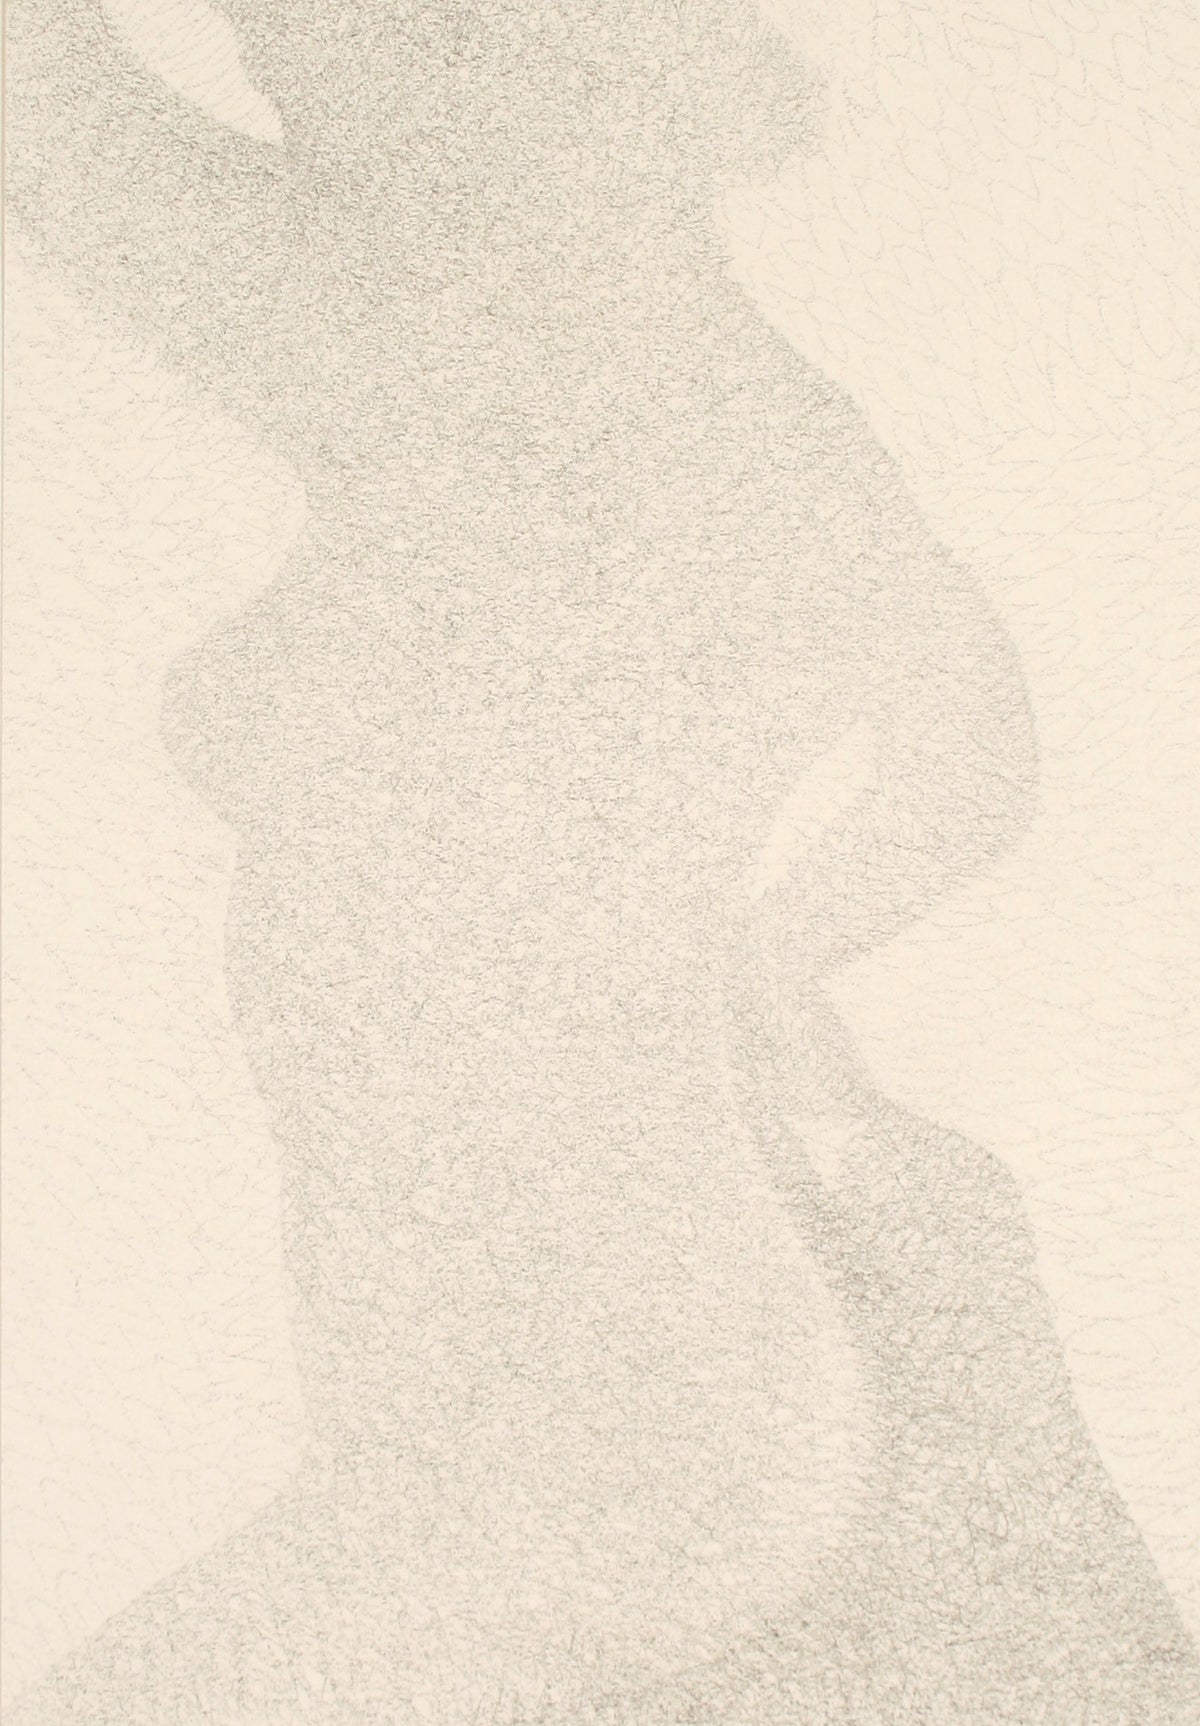 Shadow of a Woman &lt;br&gt;Late 20th Century Graphite &lt;br&gt;&lt;br&gt;#71540